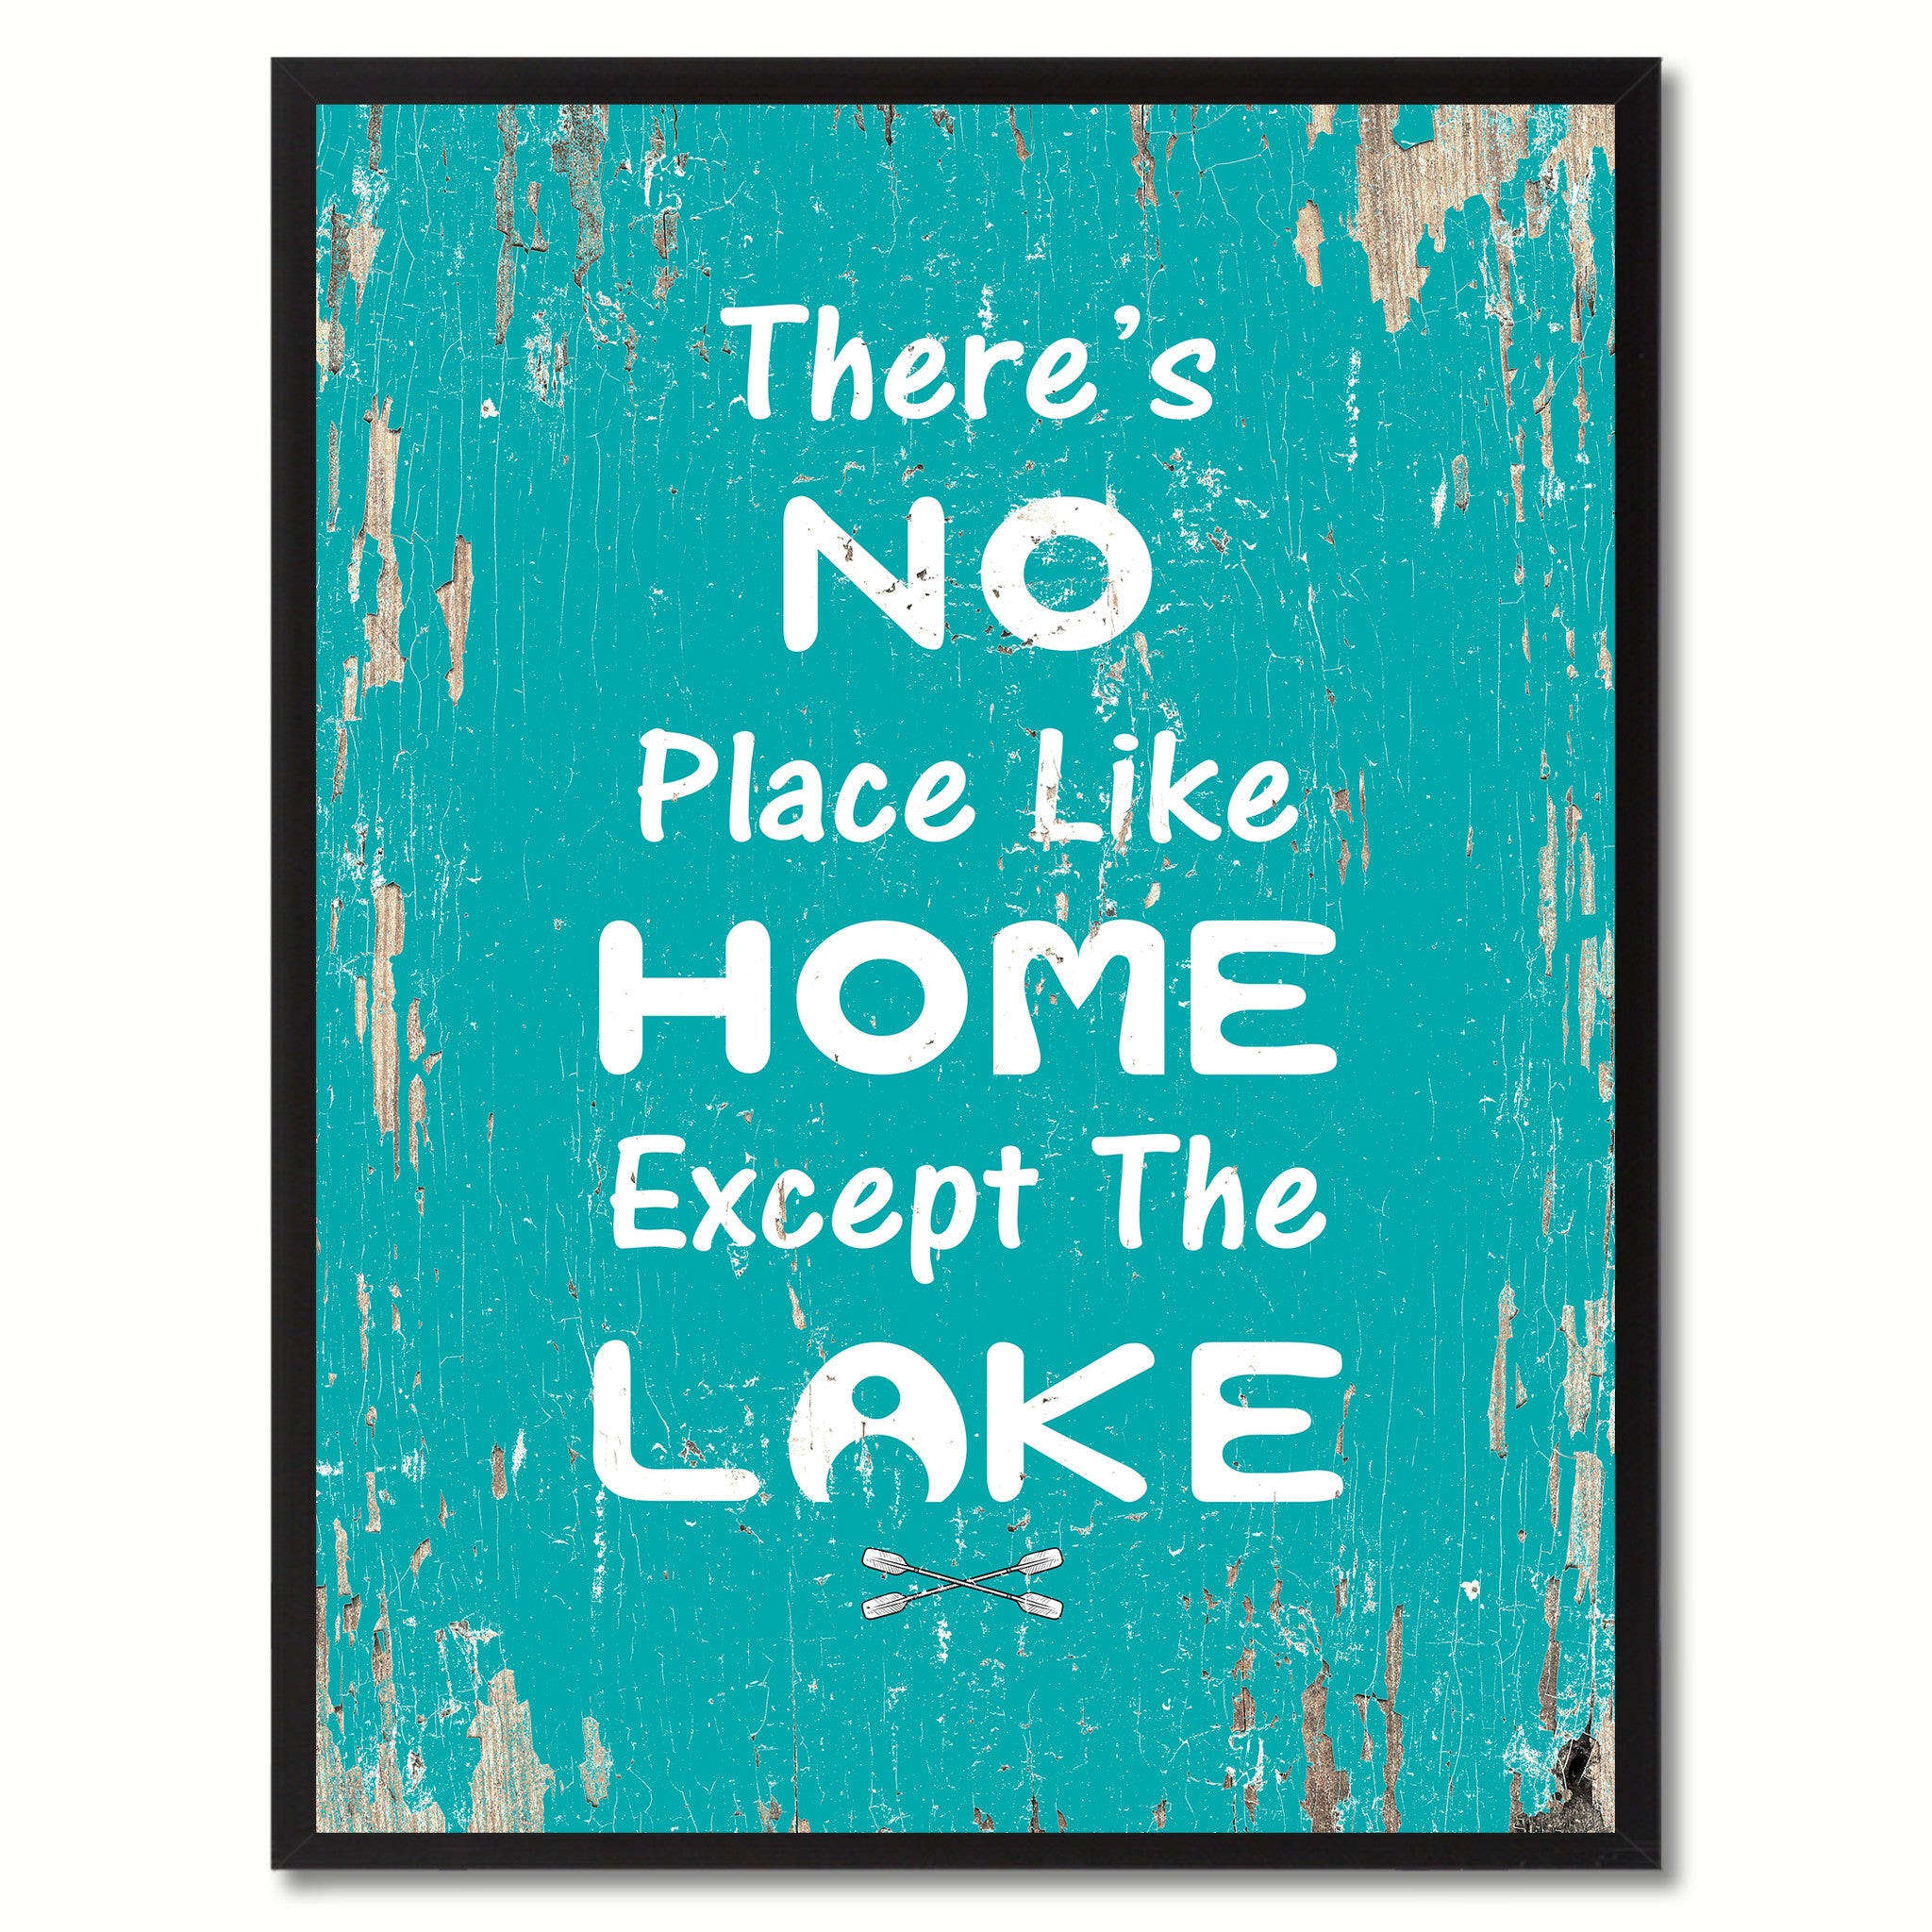 There's No Place Like Home Except The Lake Saying Canvas Print, Black Picture Frame Home Decor Wall Art Gifts